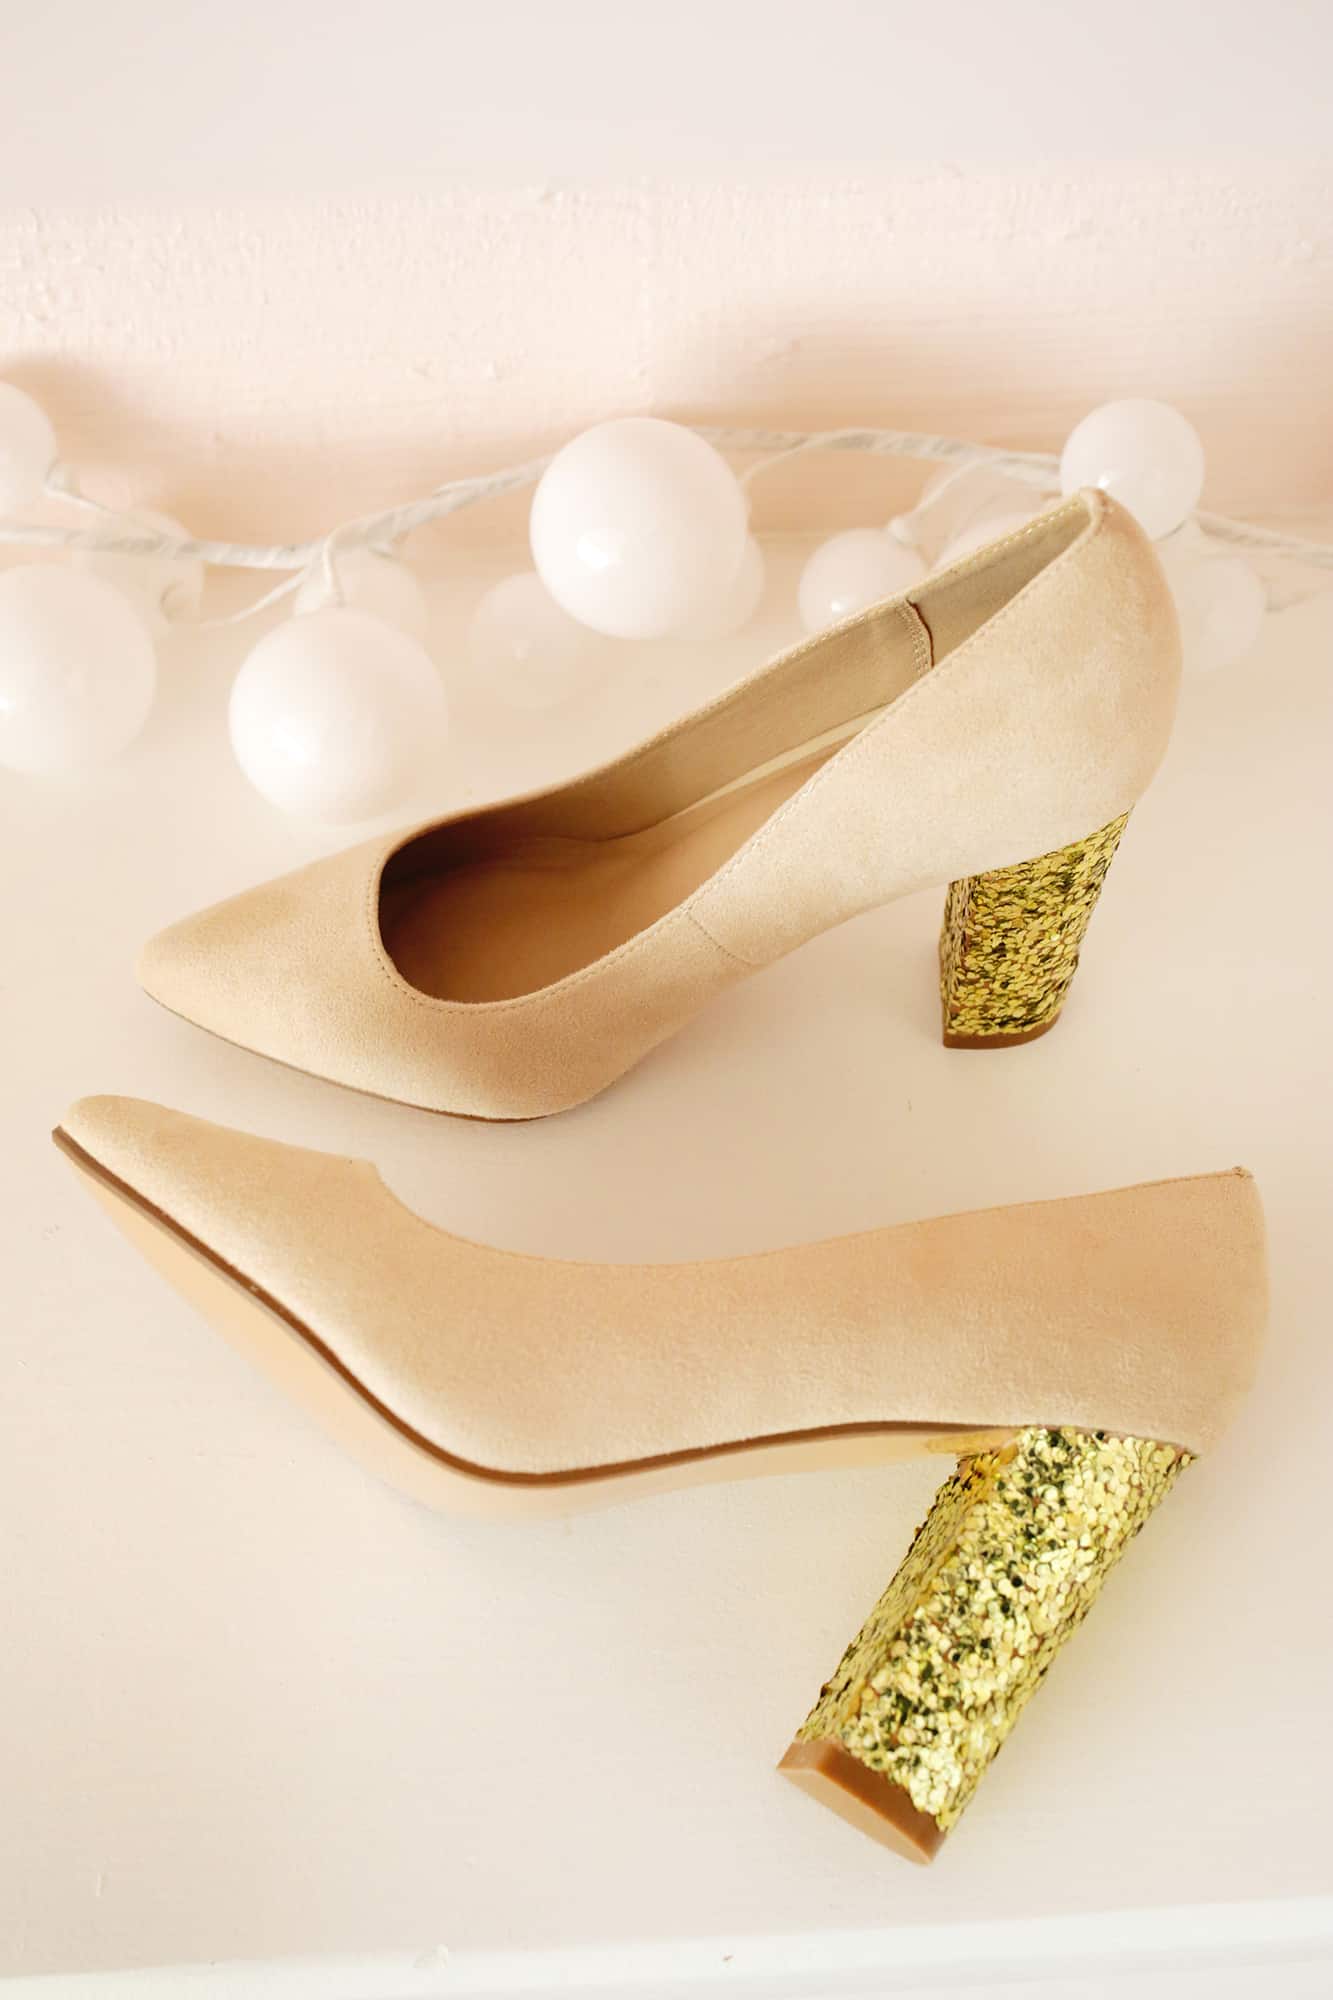 Shoes with gold glittered heels